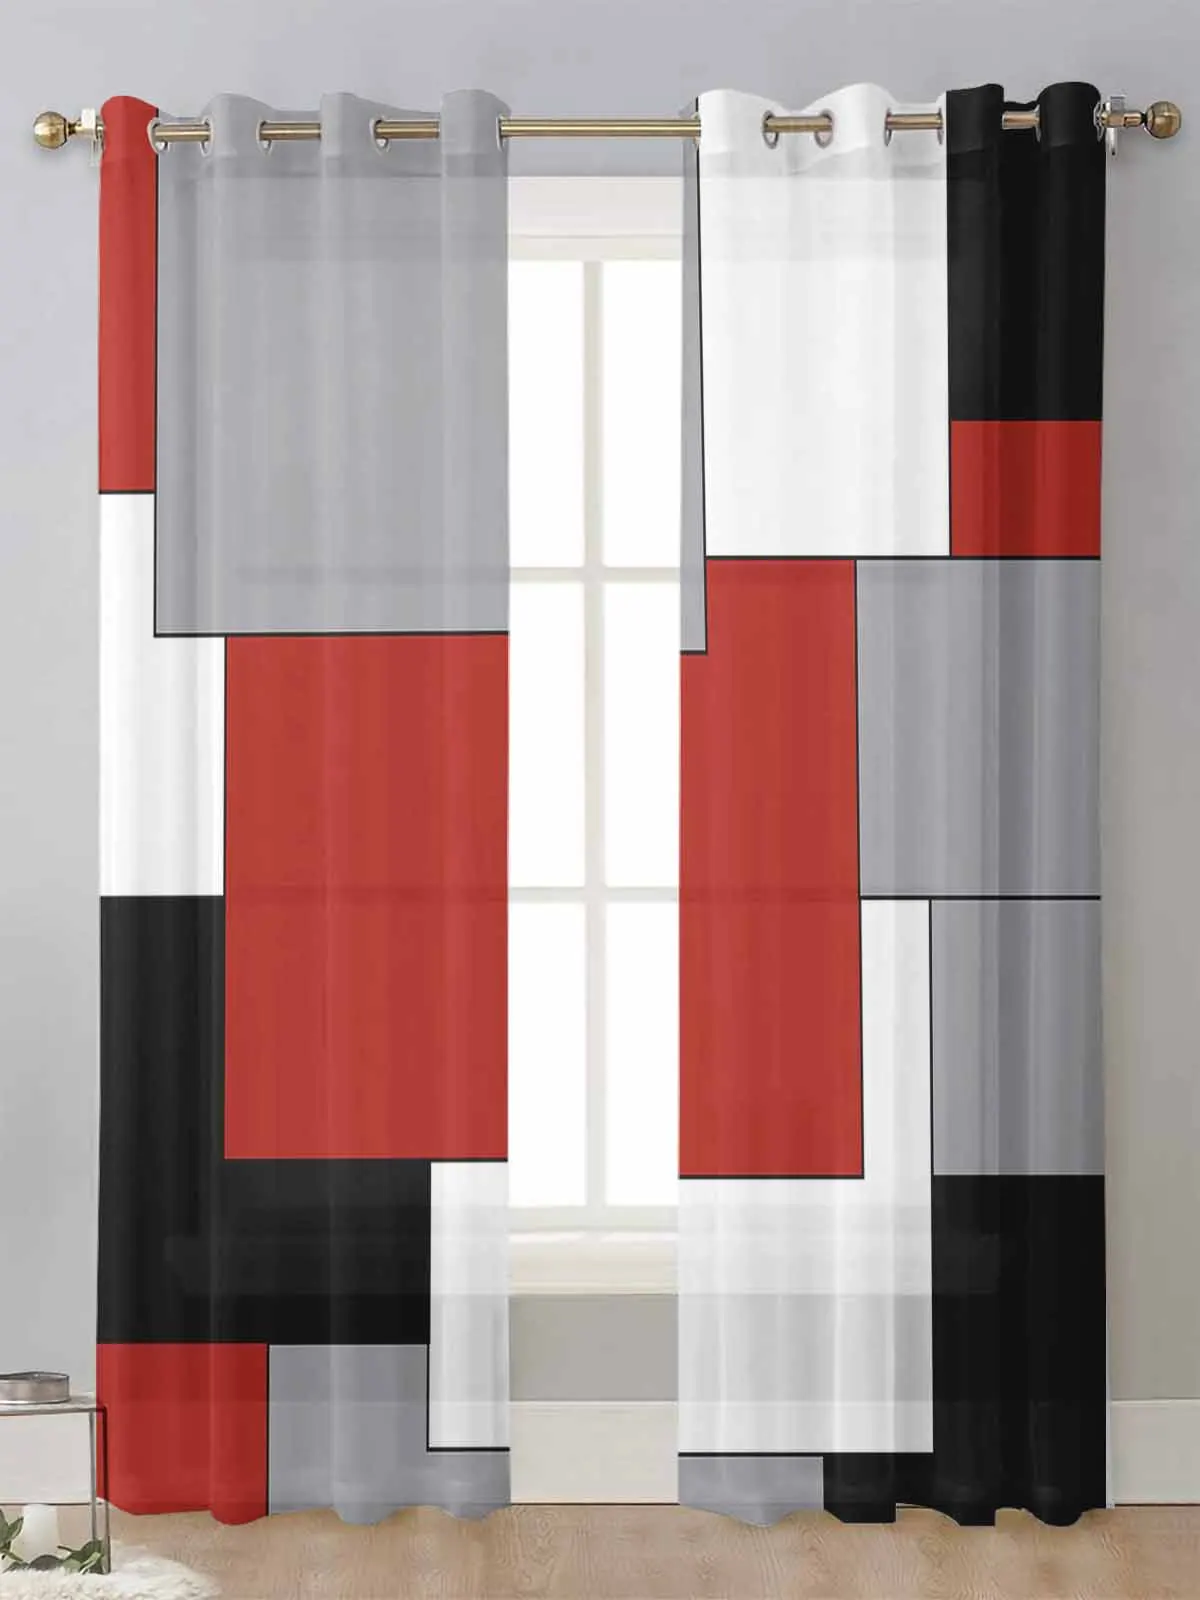 

Red Black Grey Patchwork Abstract Art Medieval Style Sheer Curtains Living Room Window Voile Tulle Curtain Drapes Home Decor